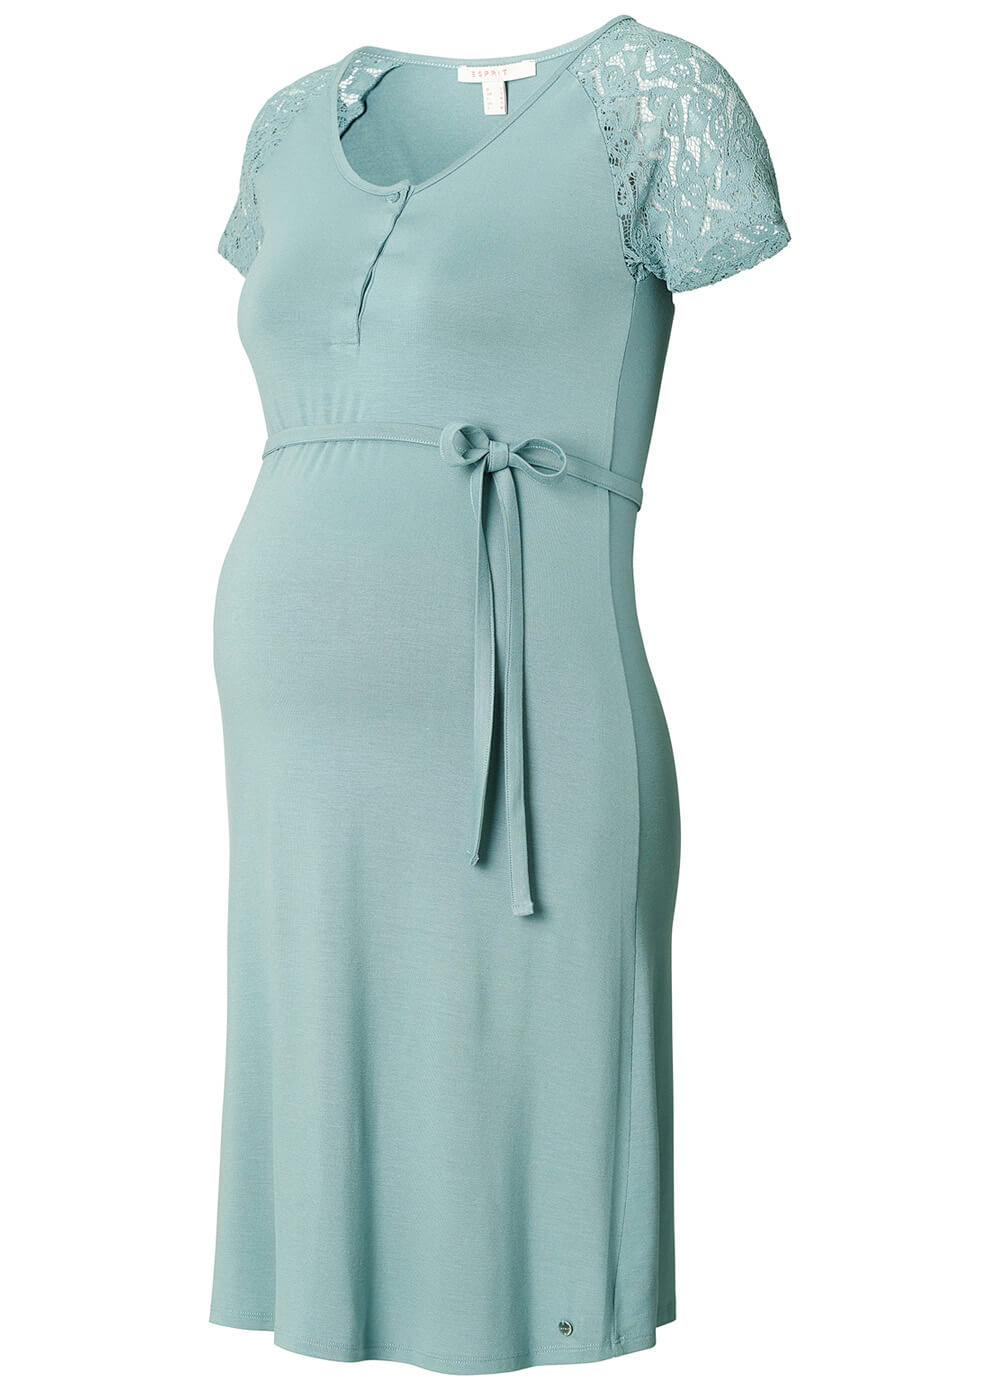 Lace Sleeve Maternity Dress in Hay Green by Esprit